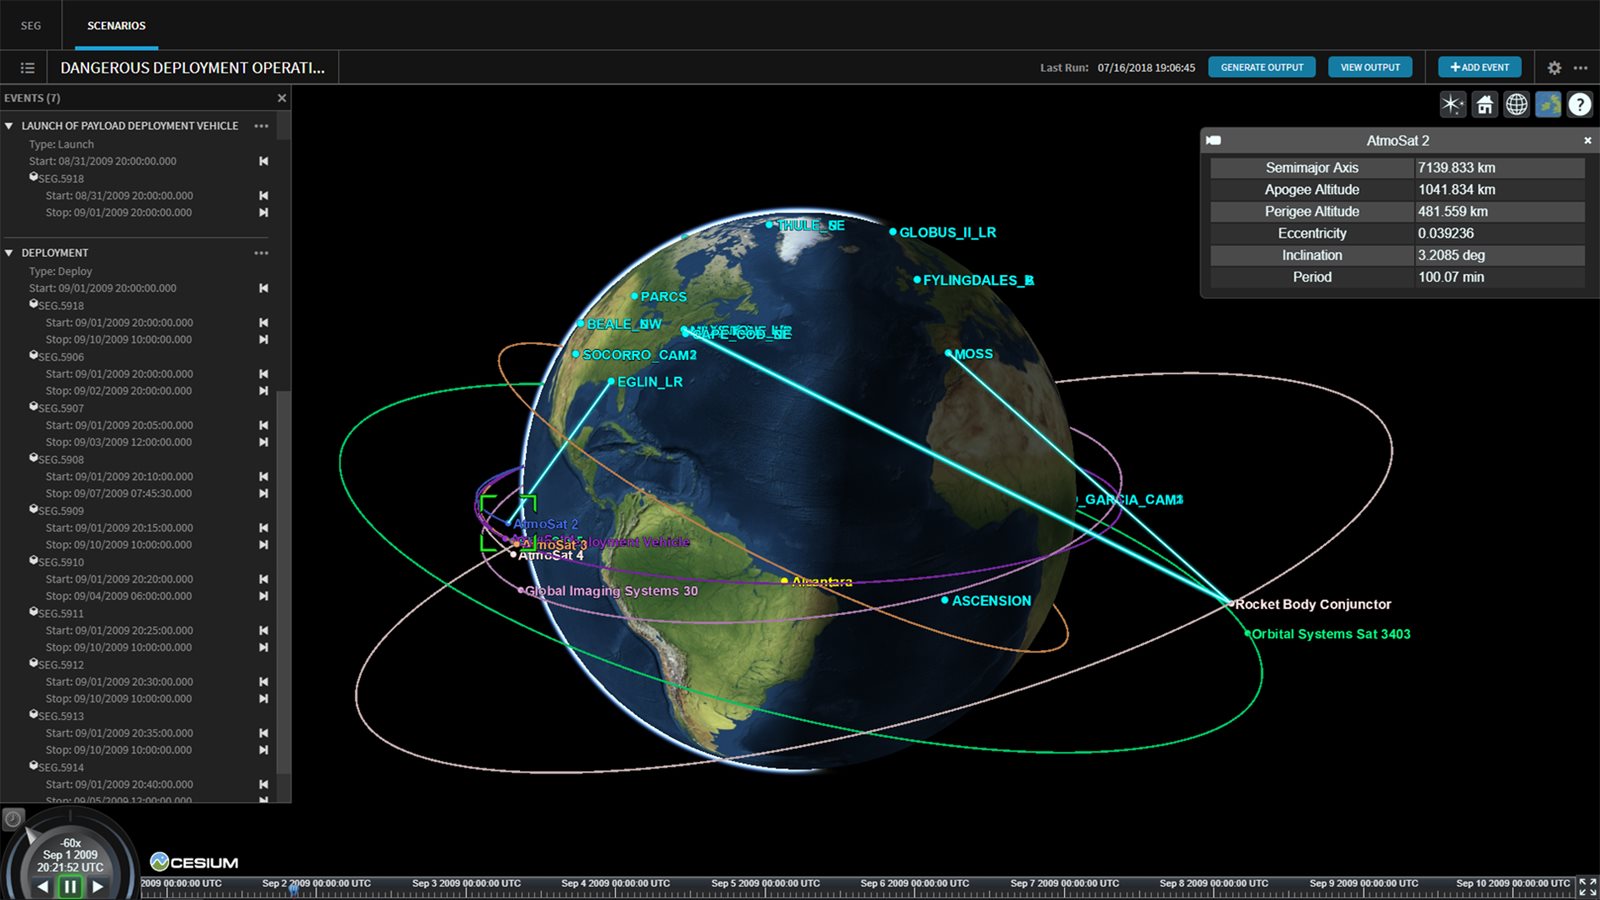 Picture of VEDCOMSPOC's Space Event Generator (SEG) dash panel illustrating object's in orbit around the earth detailing their apogee altitude, perigee altitude, eccentricity, inclination and period.